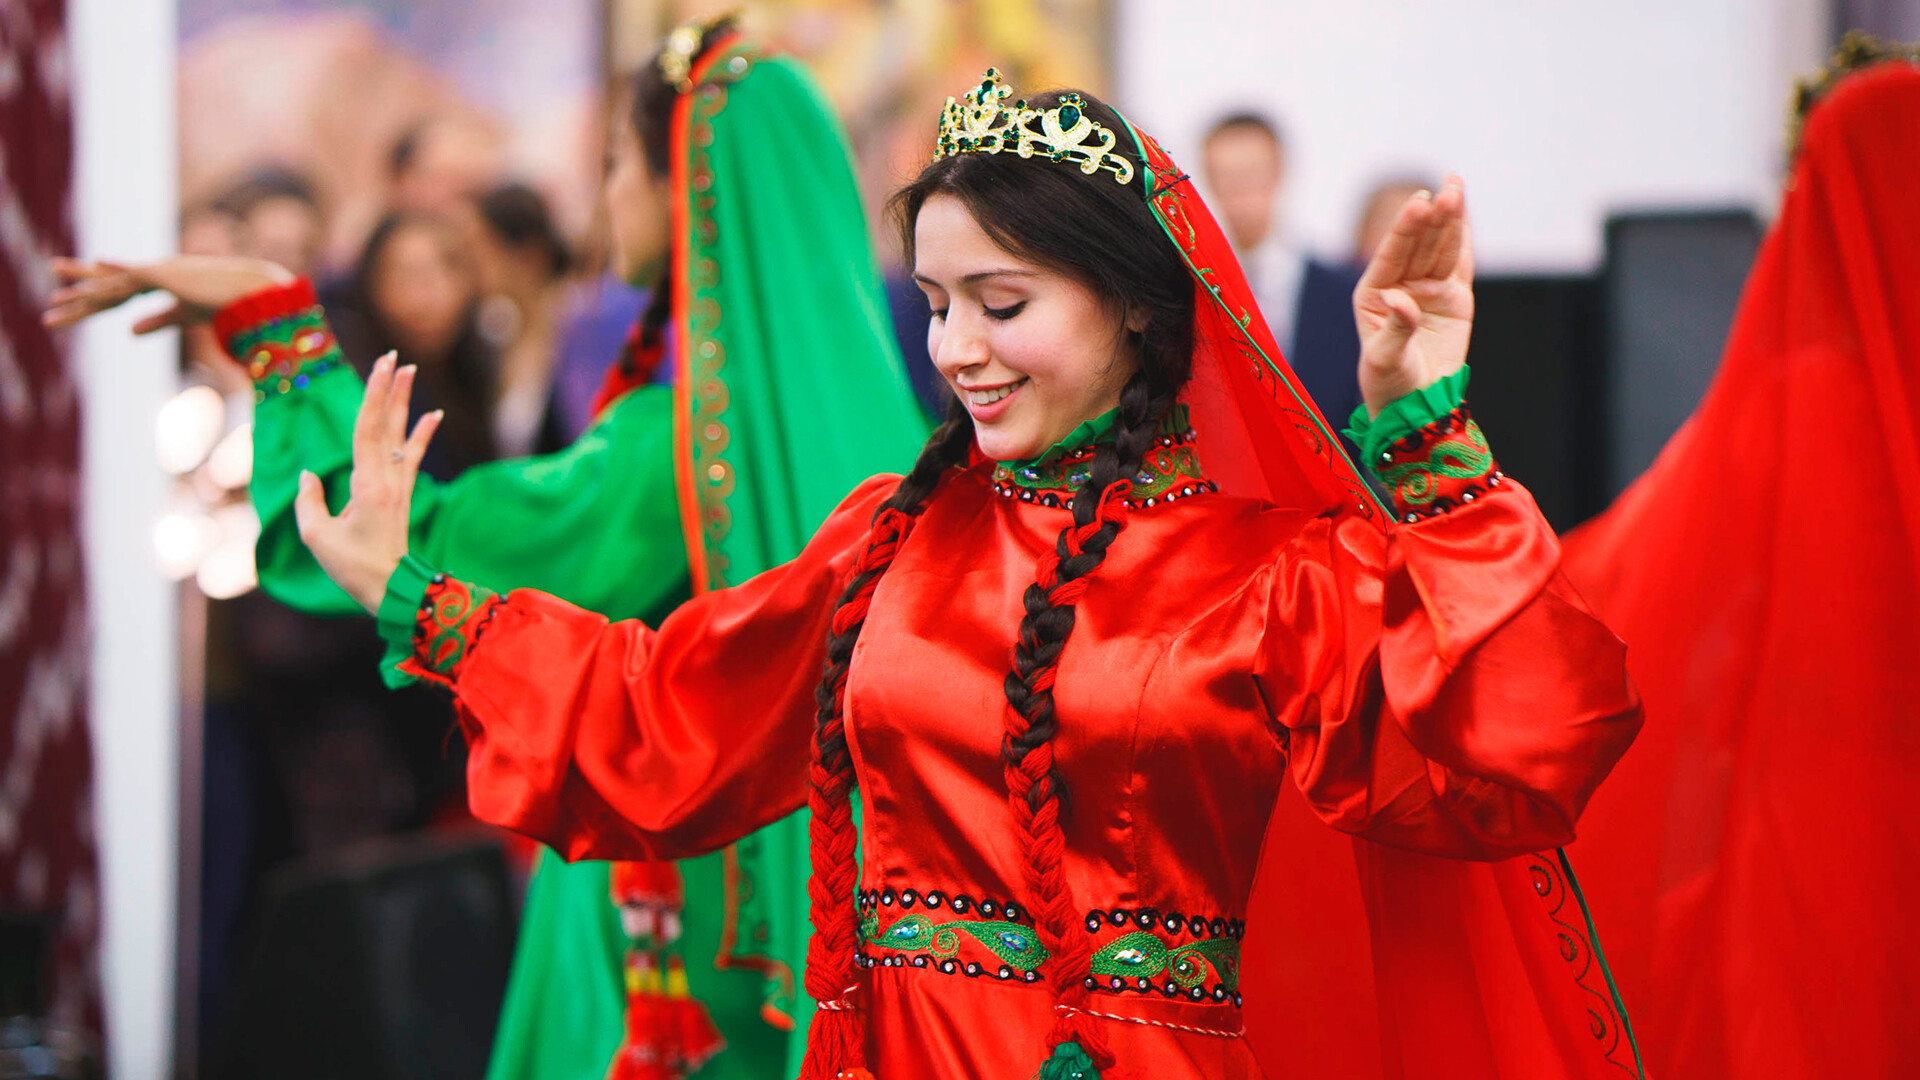 The artist from Tajikistan at the Ethnomir festival in Moscow. 